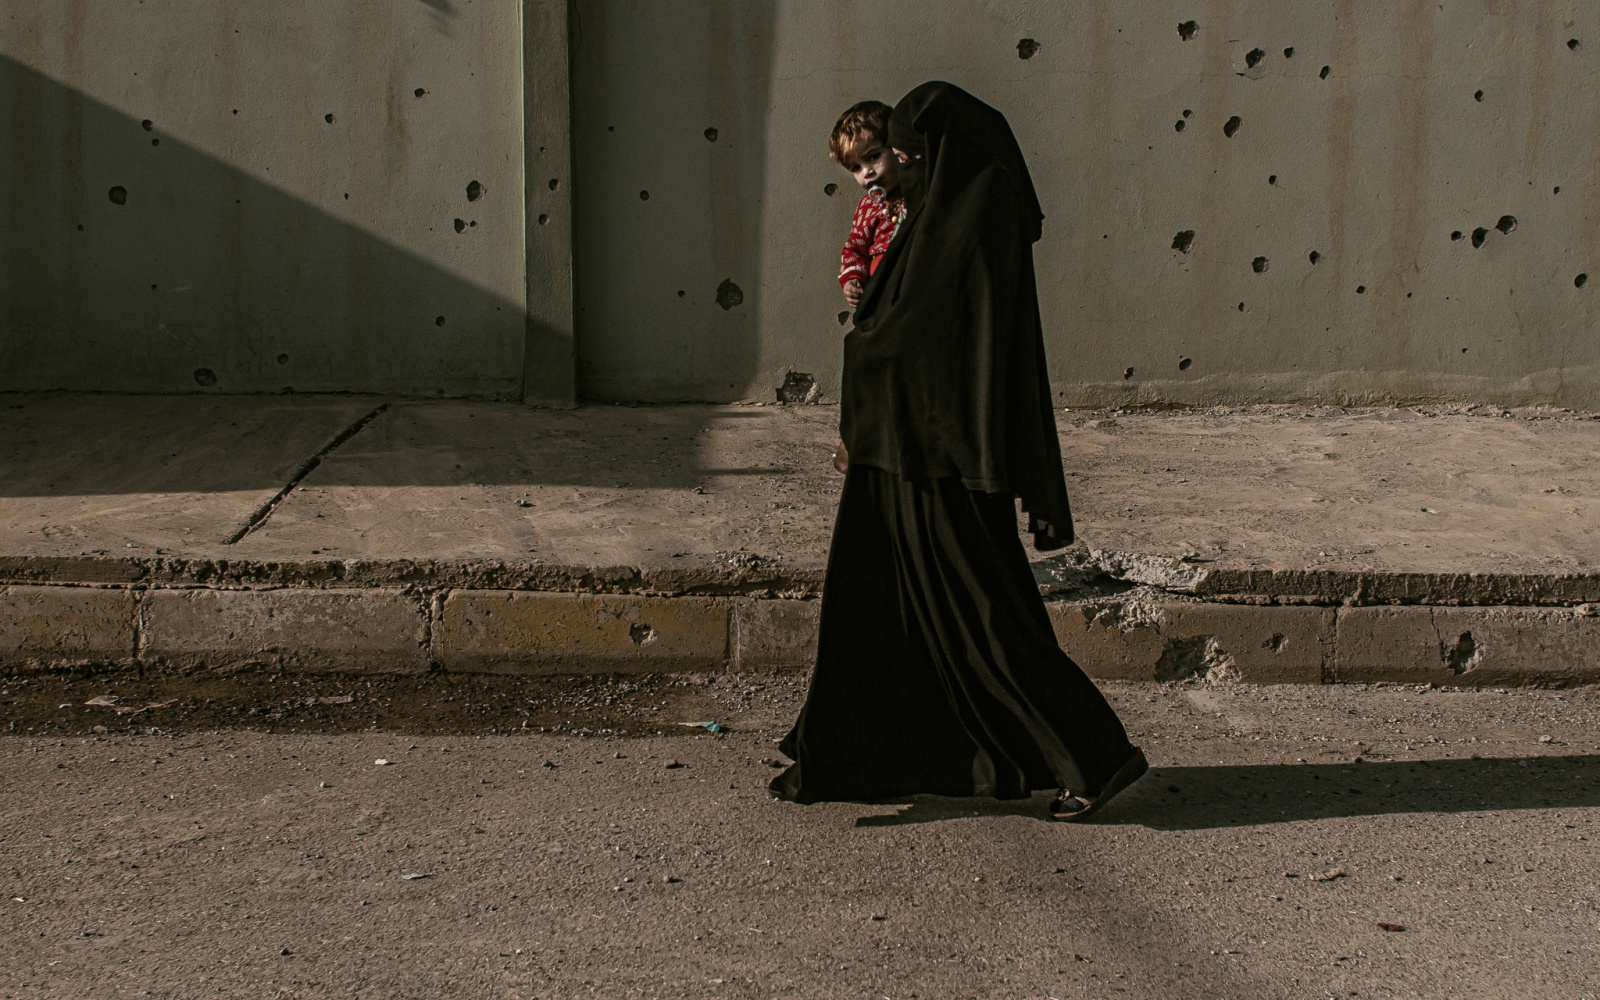 A woman covered in black with a child walks in front of a wall riddled with firearms.